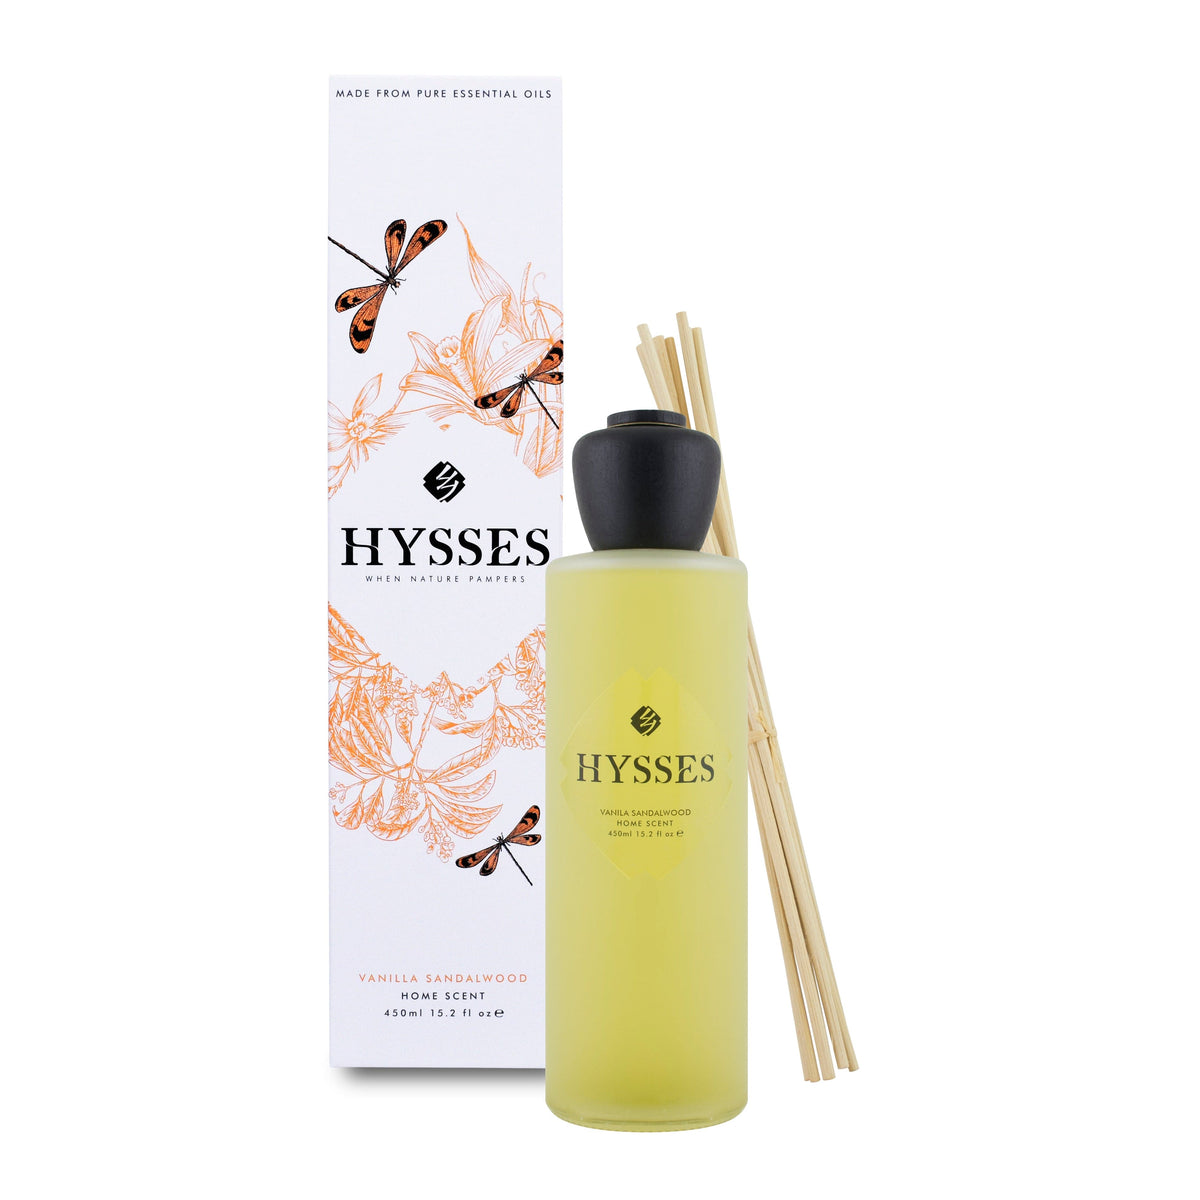 Hysses Home Scents Home Scent Reed Diffuser Vanilla Sandalwood